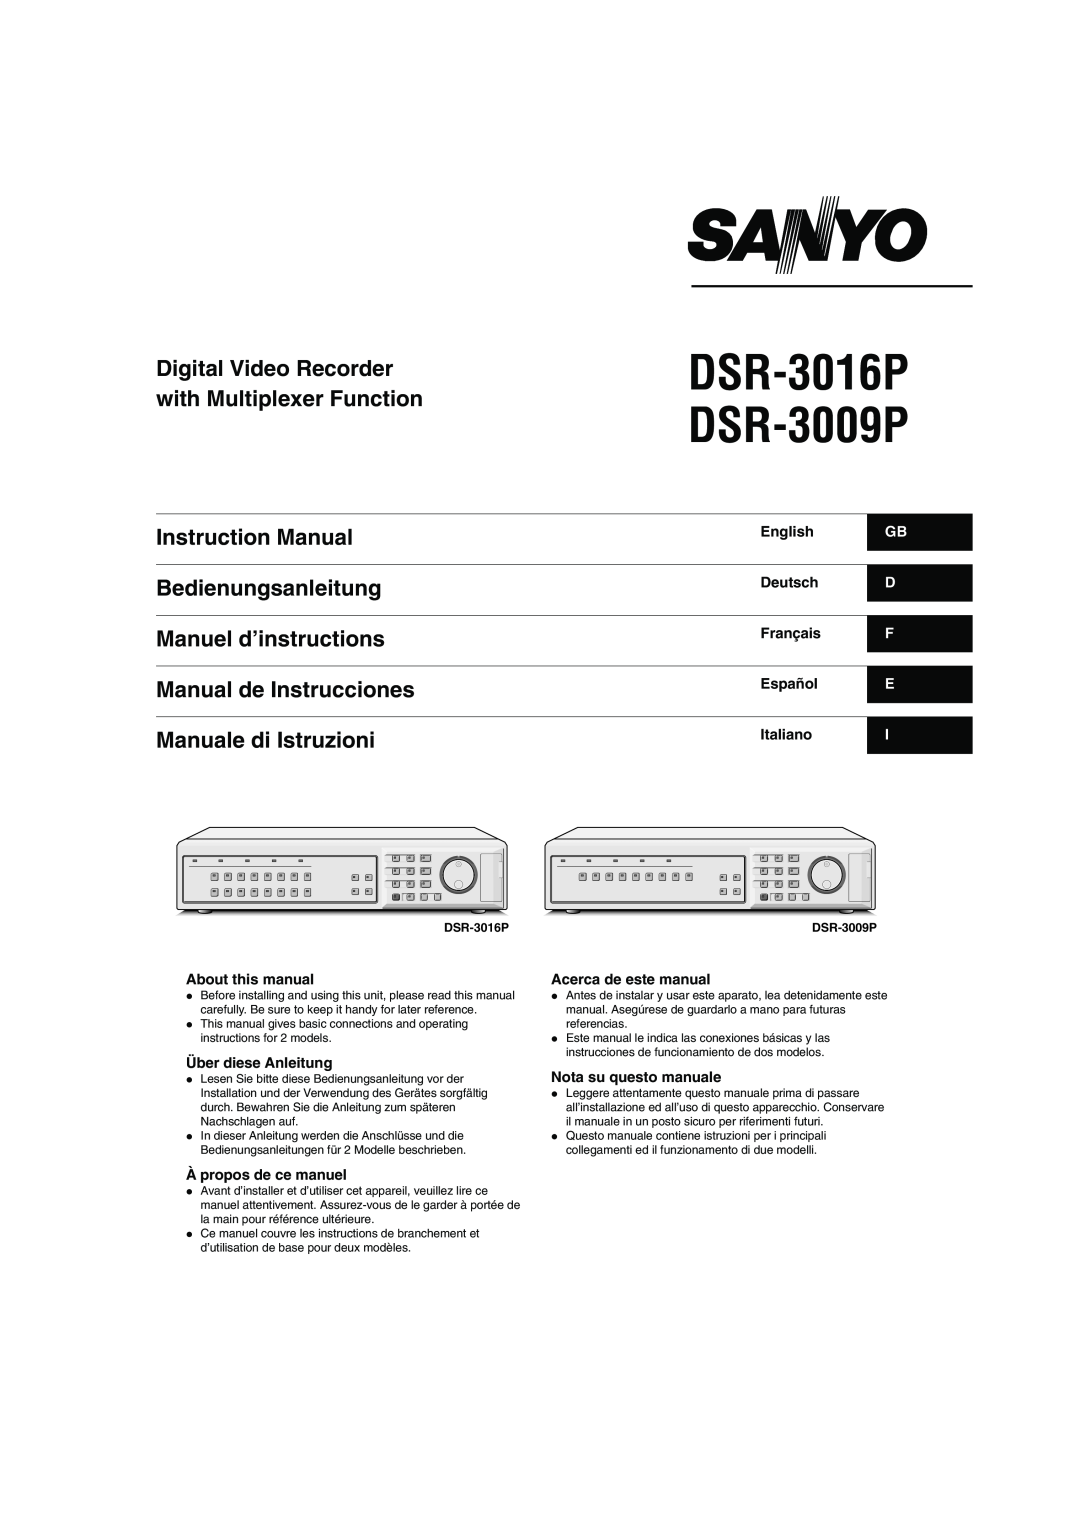 Sanyo instruction manual DSR-3016P DSR-3009P, Digital Video Recorder with Multiplexer Function, Instruction Manual 